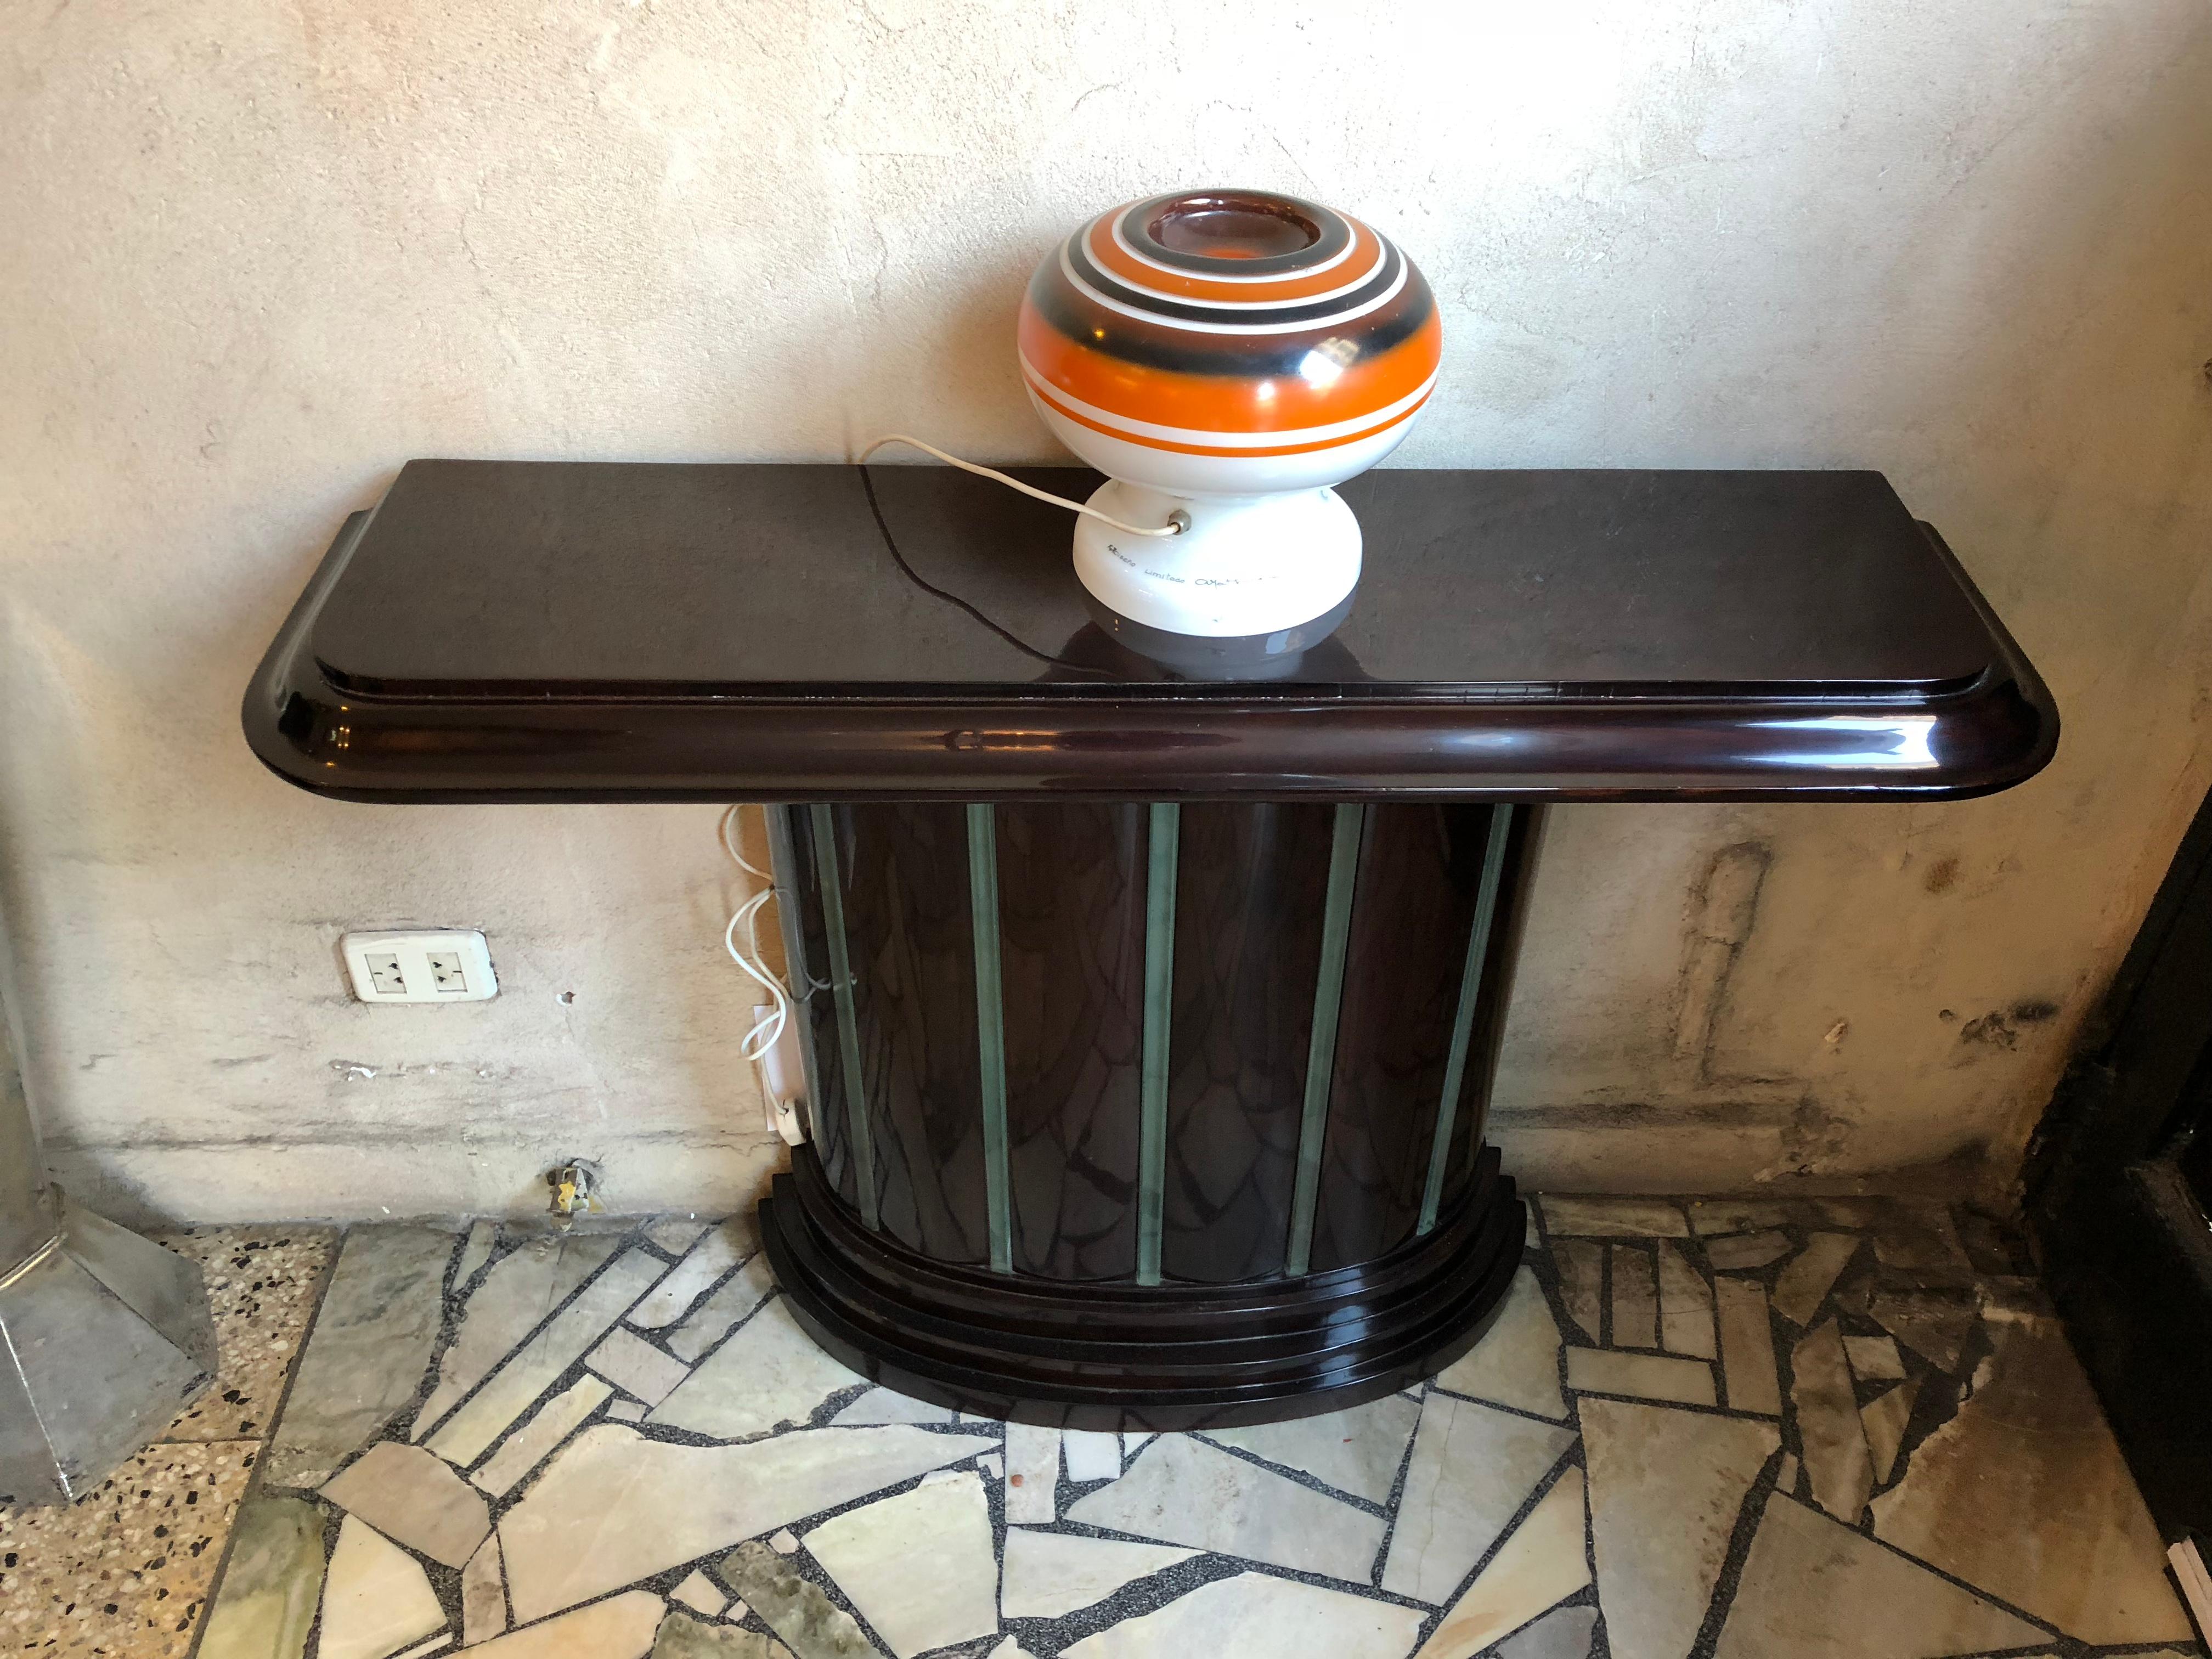 Console Art Deco
Material: Wood and glass
France.
We have specialized in the sale of Art Deco and Art Nouveau styles since 1982.If you have any questions we are at your disposal.
Pushing the button that reads 'View All From Seller'. And you can see